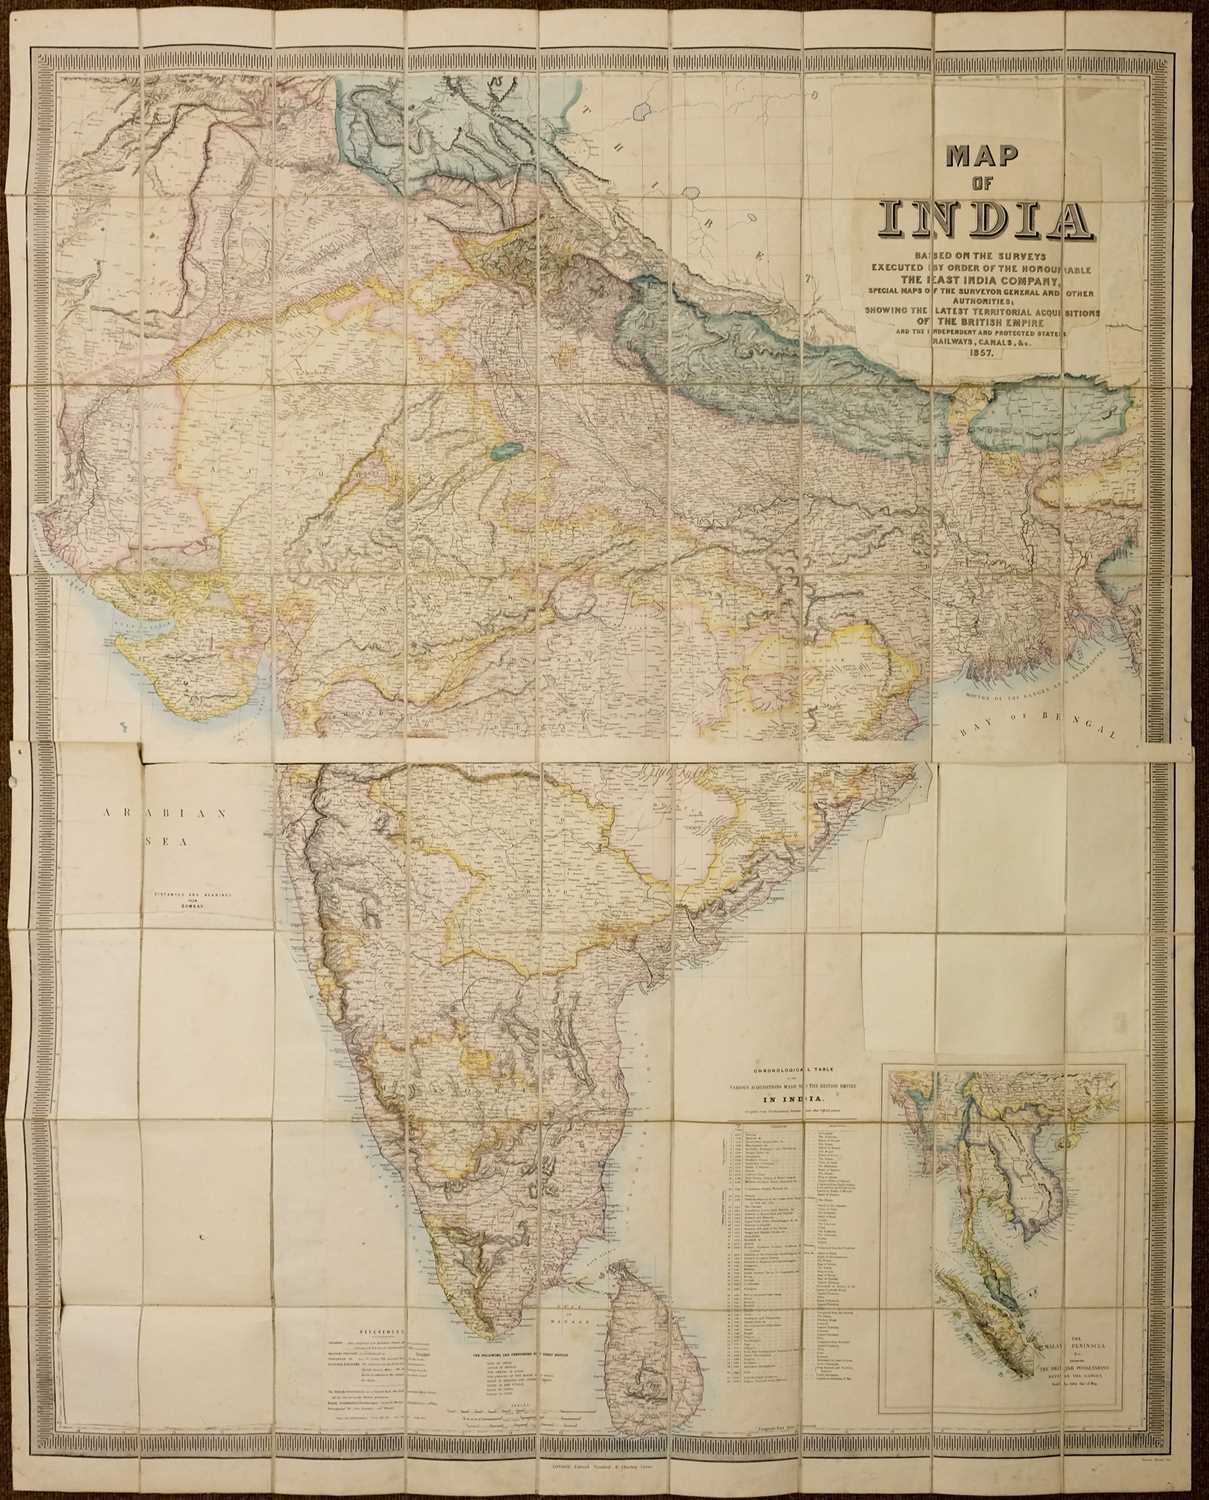 Lot 11 - Stanford (Edward, publisher). Map of India, 1857